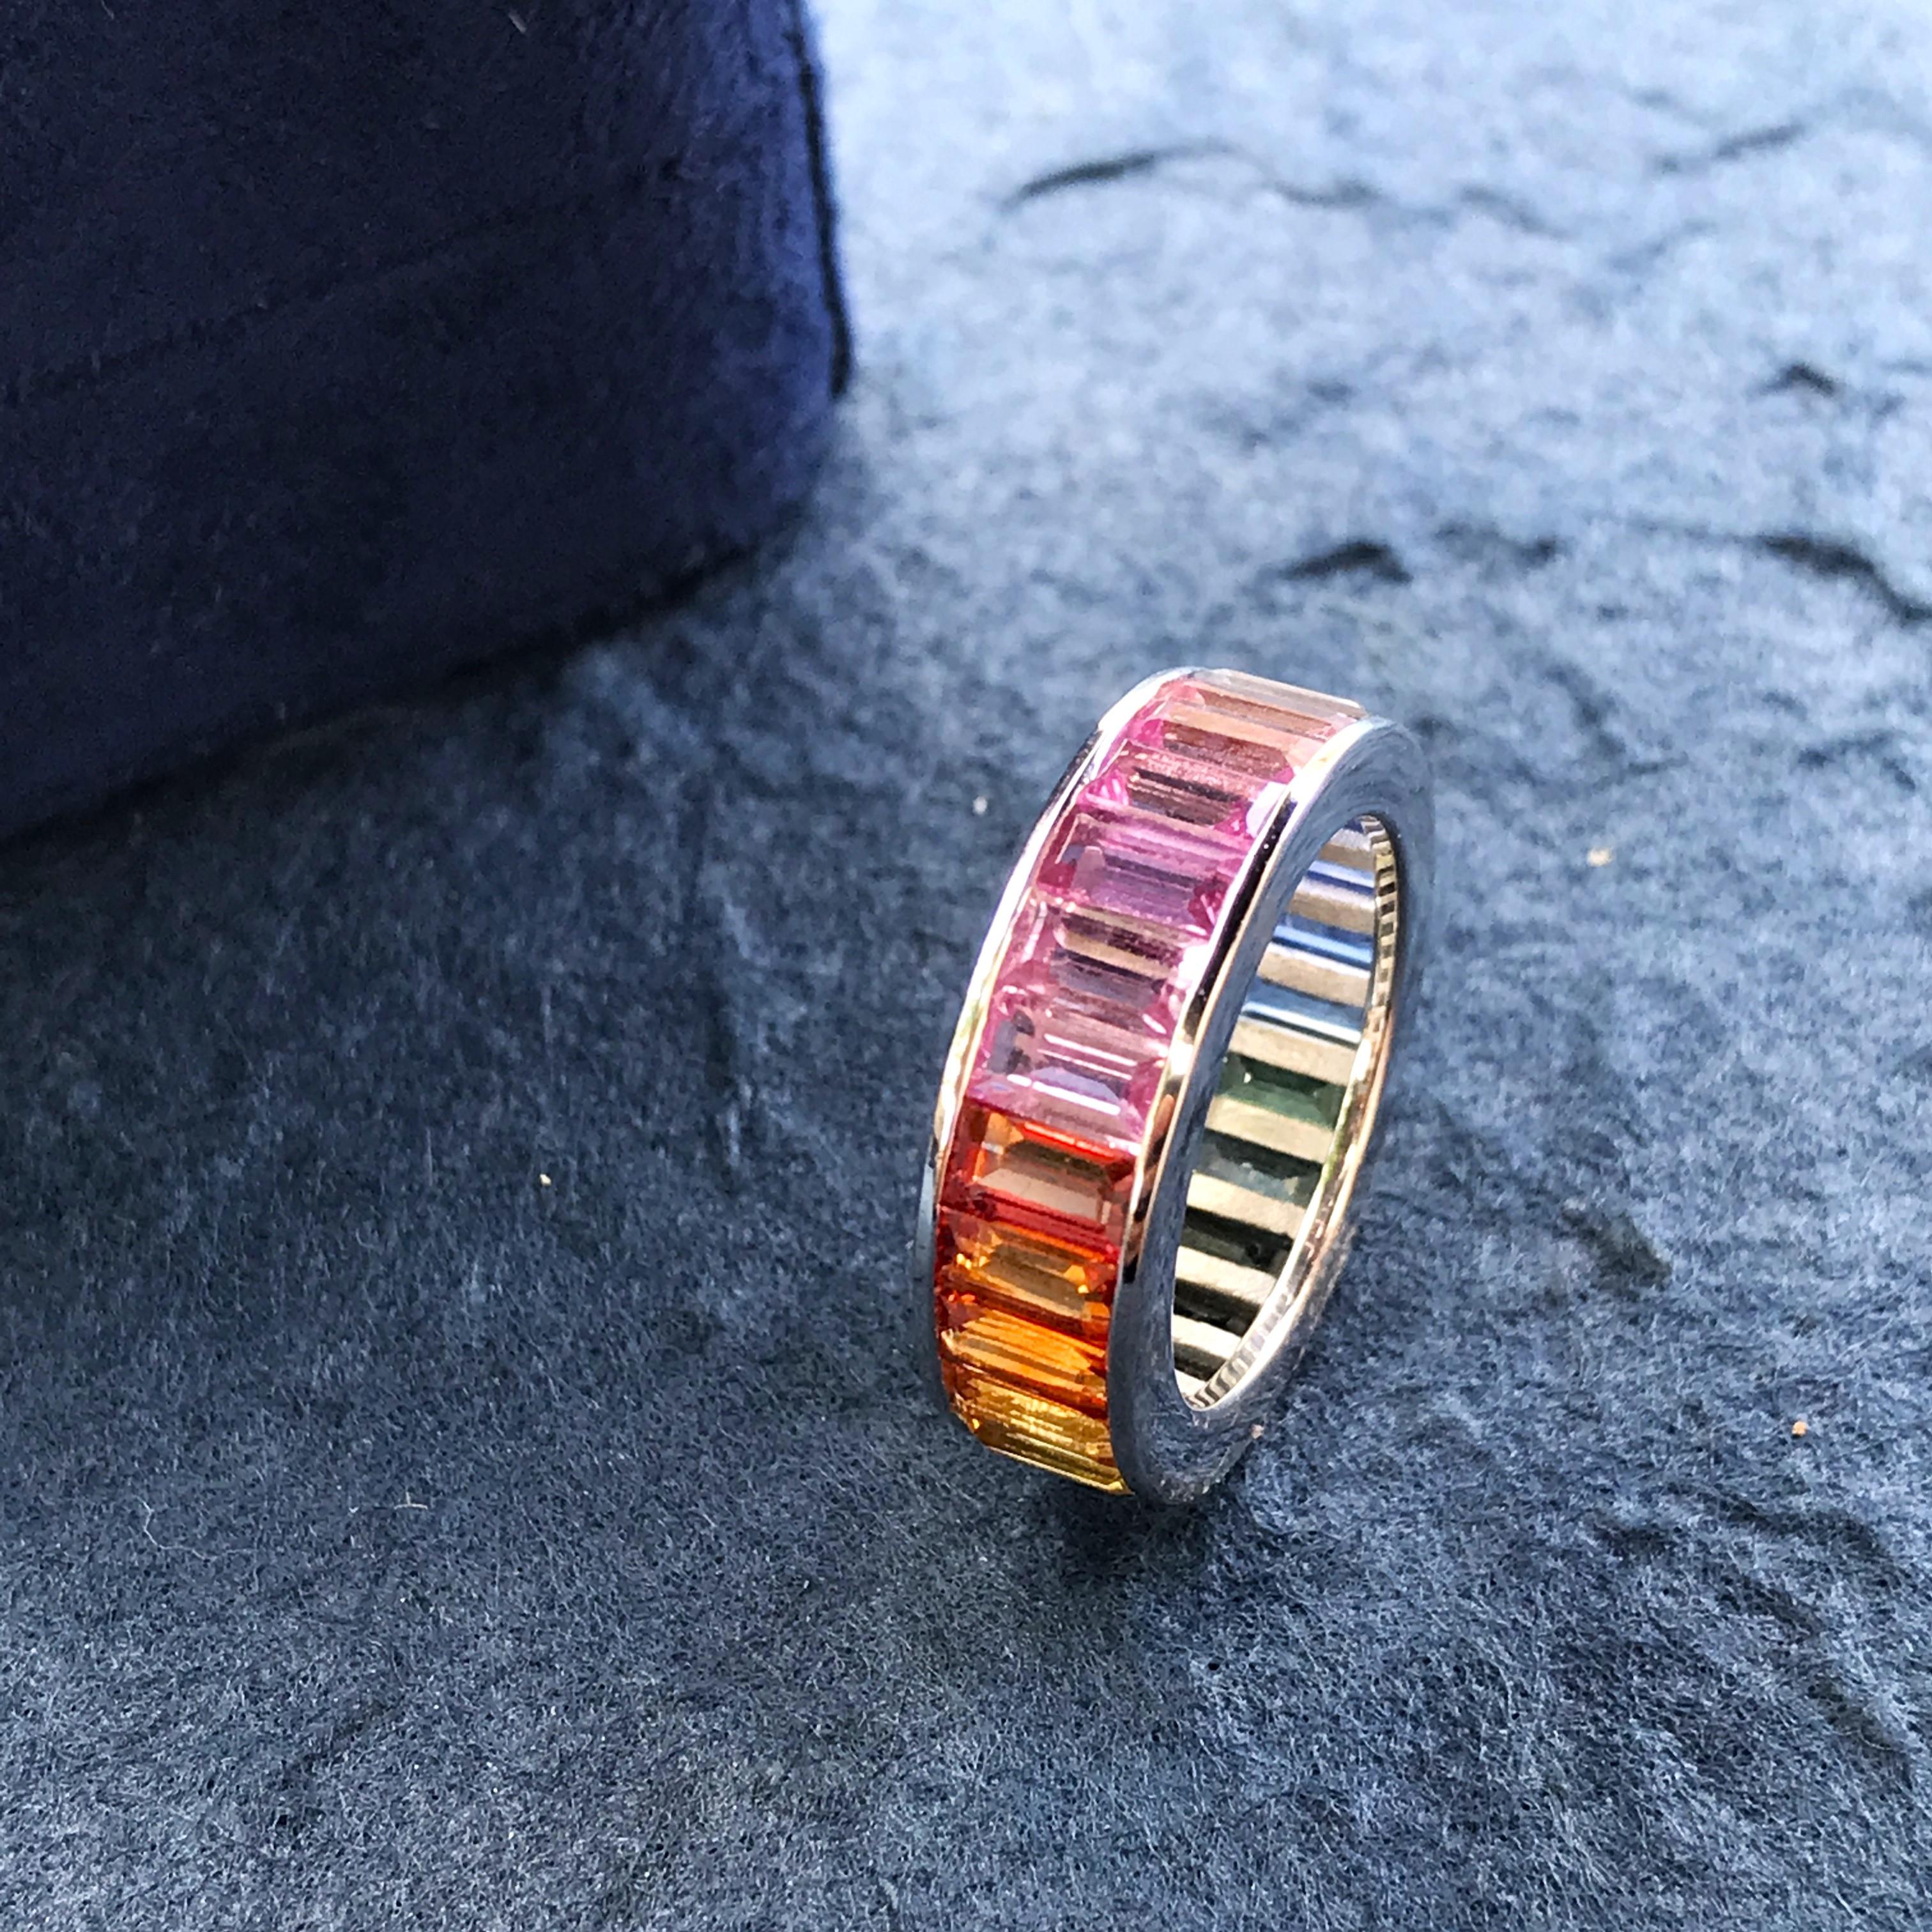 A unisex ring that can truly amp up the style of any outfit!

This rainbow sapphire eternity band is the perfect addition to your collection. Twenty-four baguette-cut rainbow sapphires are vertically set in18K white gold. The ring measures 6 mm.